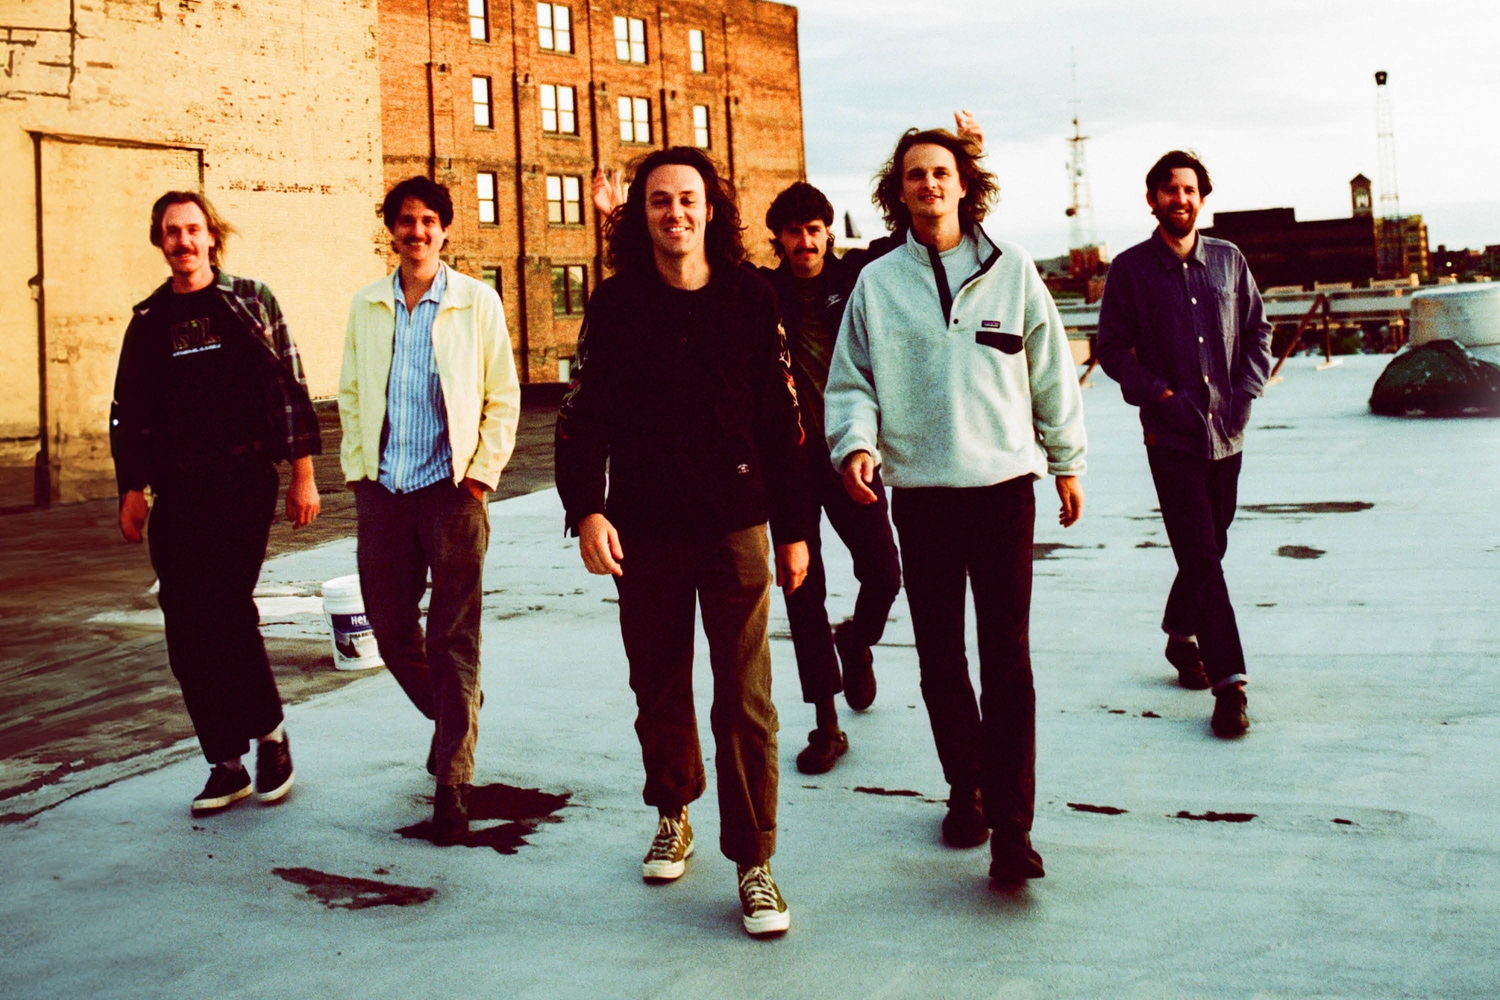 King Gizzard & The Lizard Wizard talk new album ‘The Silver Cord’ and look back on their huge career